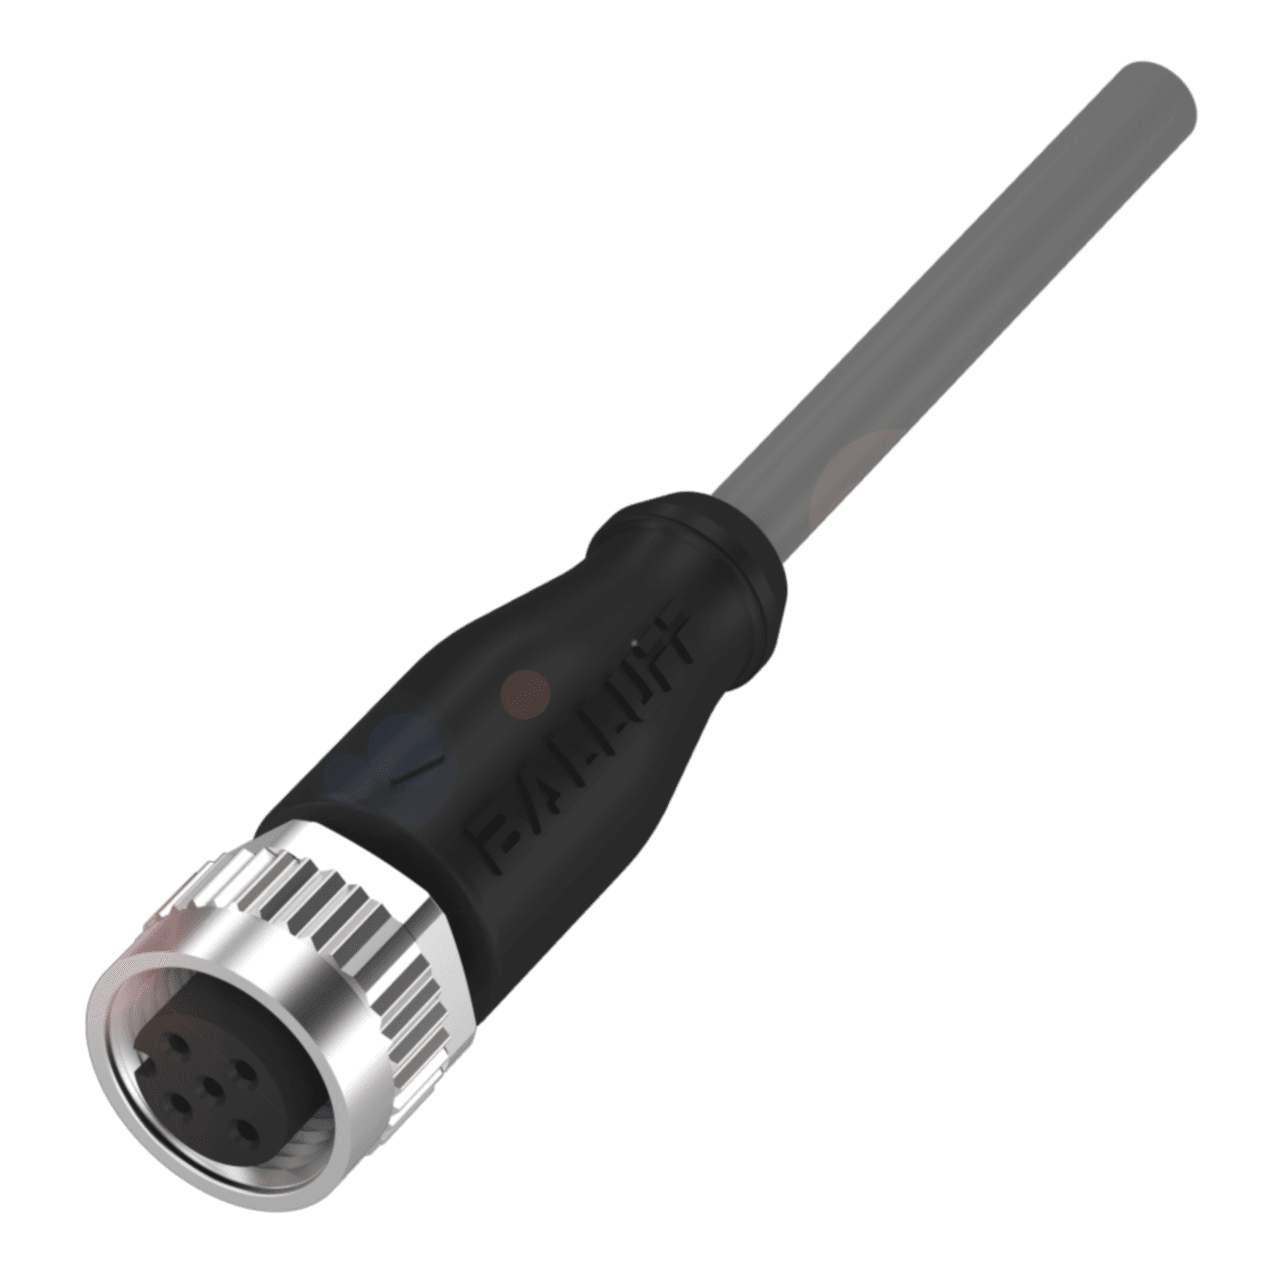 Balluff BCC084W Connection: M12x1-Female, Straight, 5-pin, A-coded, Cable: PVC gray, 15.00 m, Drag chain compatible, Number of conductors: 5, Conductor cross-section: 0.34 mm², Cable temperature, fixed routing: -40...105 °C, Cable temperature, flexible routing: -5...105 